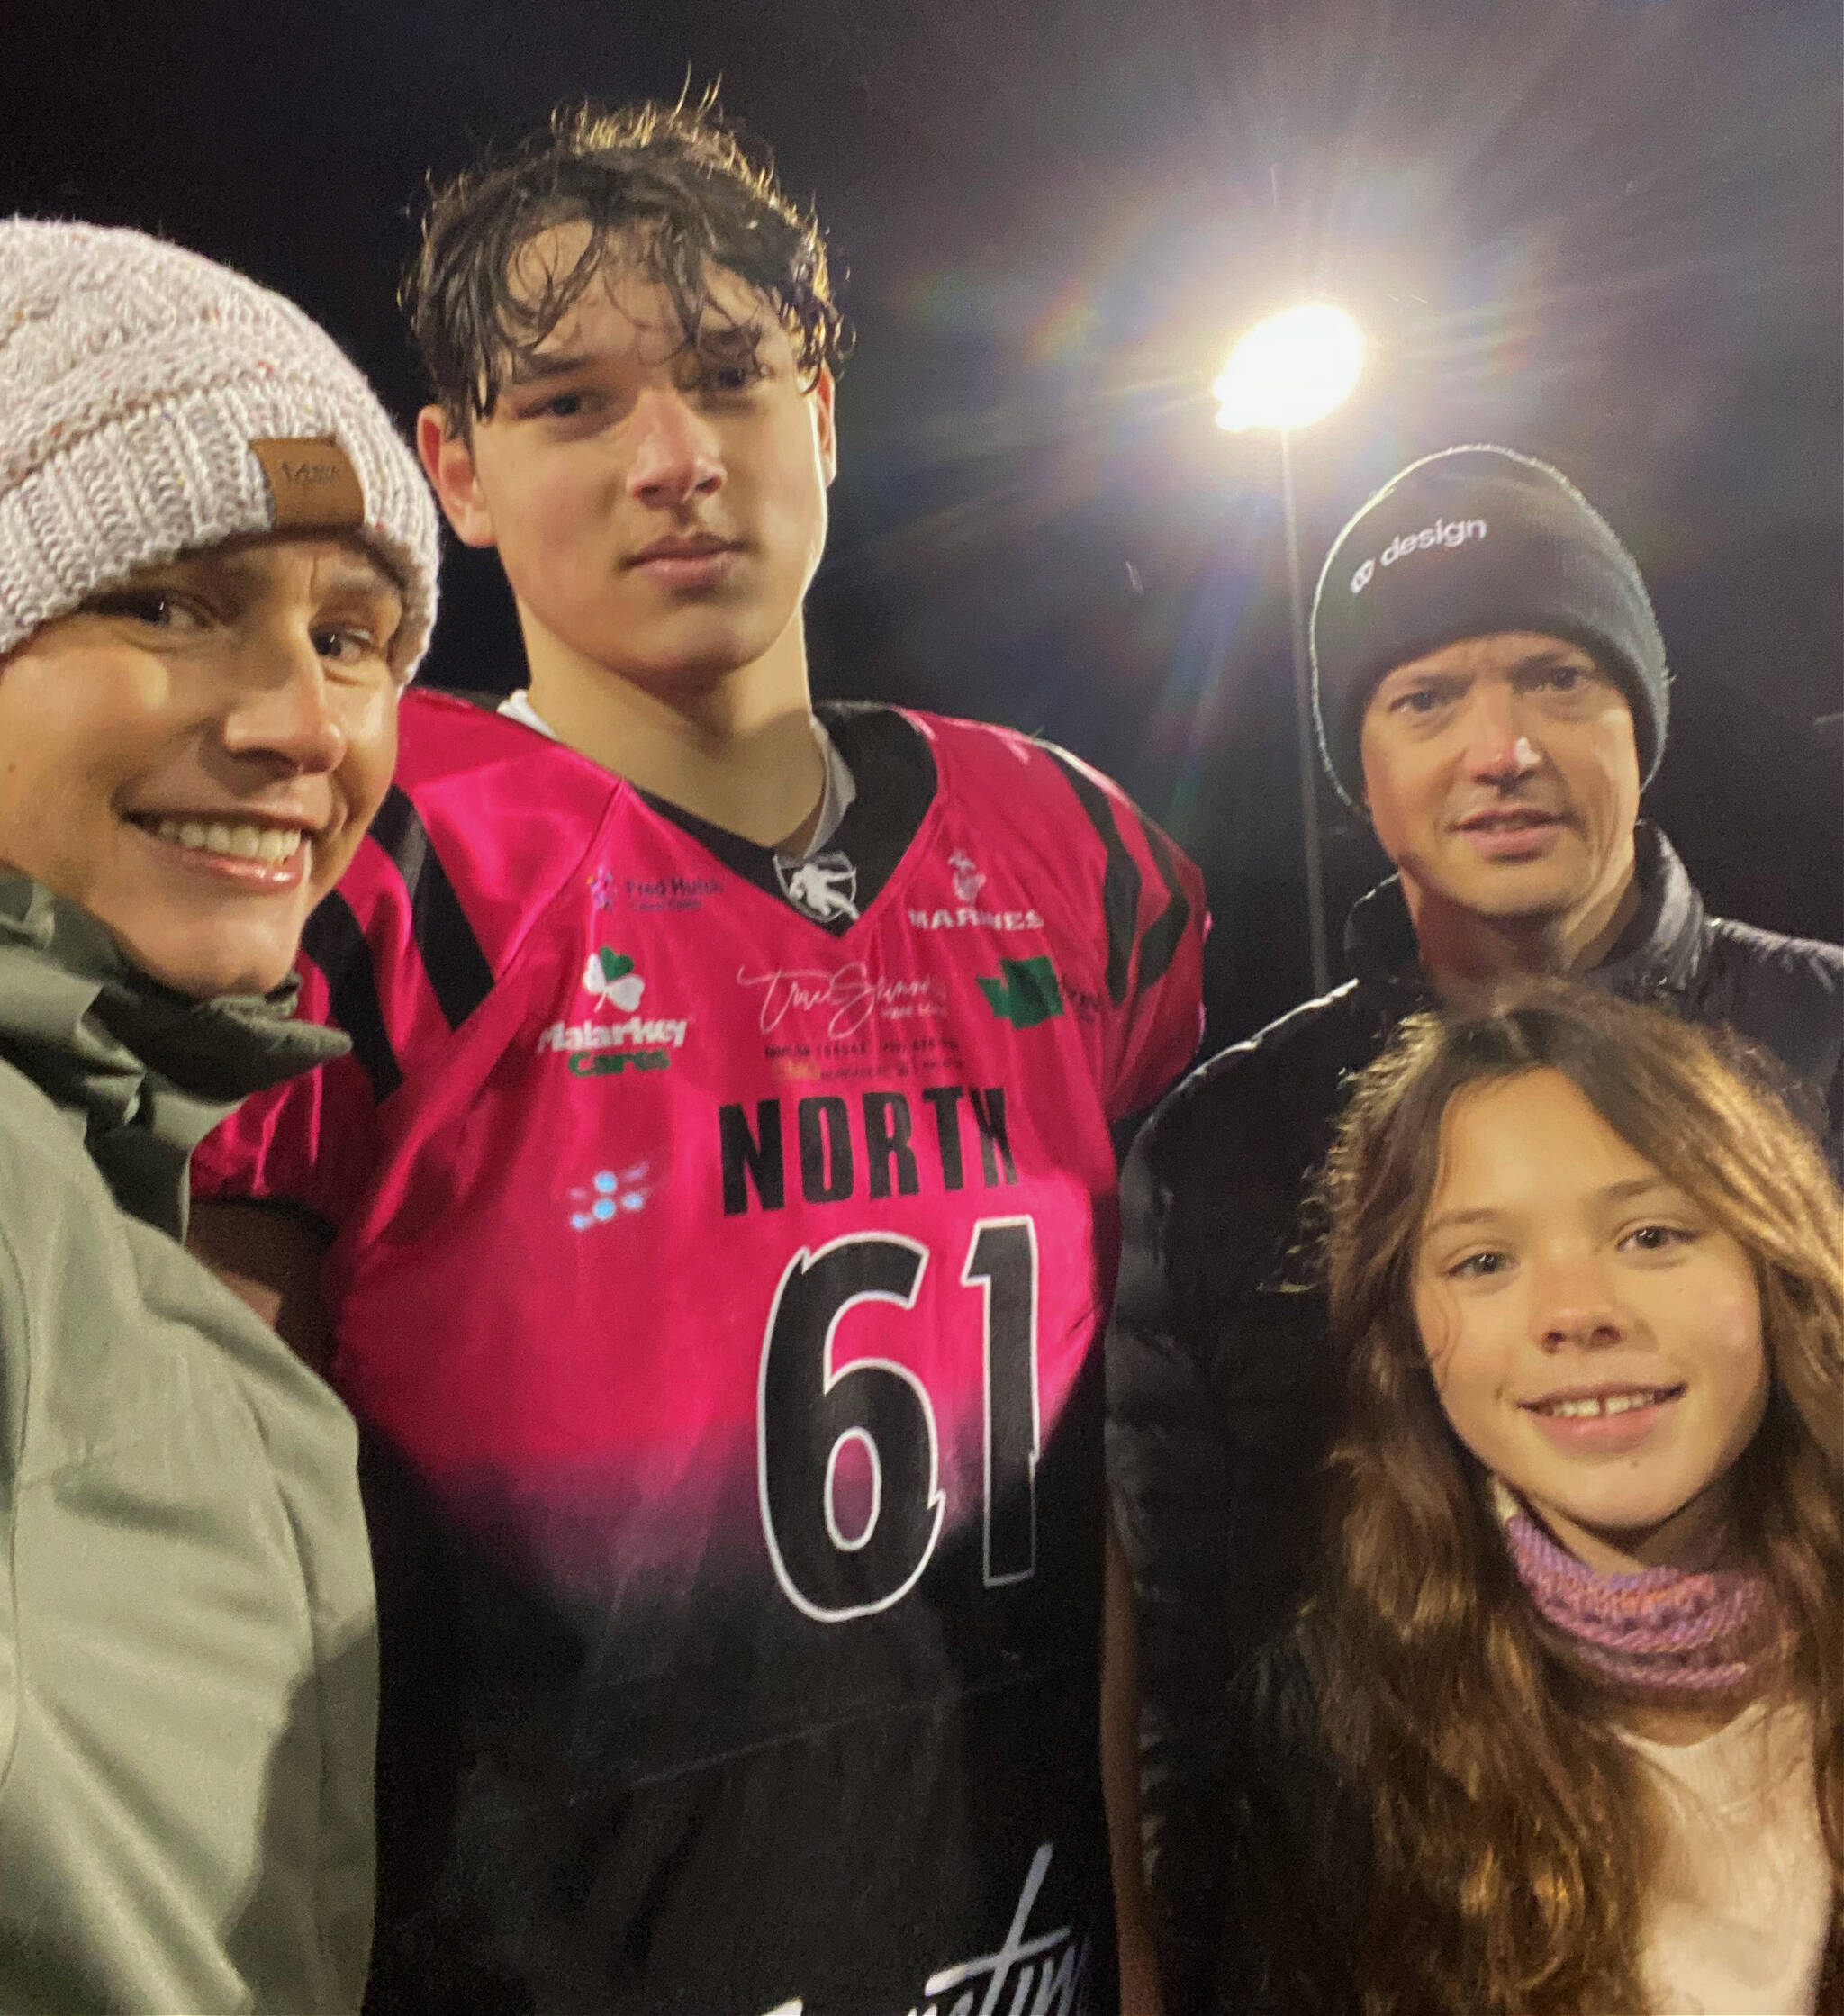 The Powell family, from left to right, Cynthia, Brycen, Brian and Caydence at the Cleats vs. Cancer charity football game on Jan. 16 at Pop Keeney Stadium in Bothell. Courtesy photo